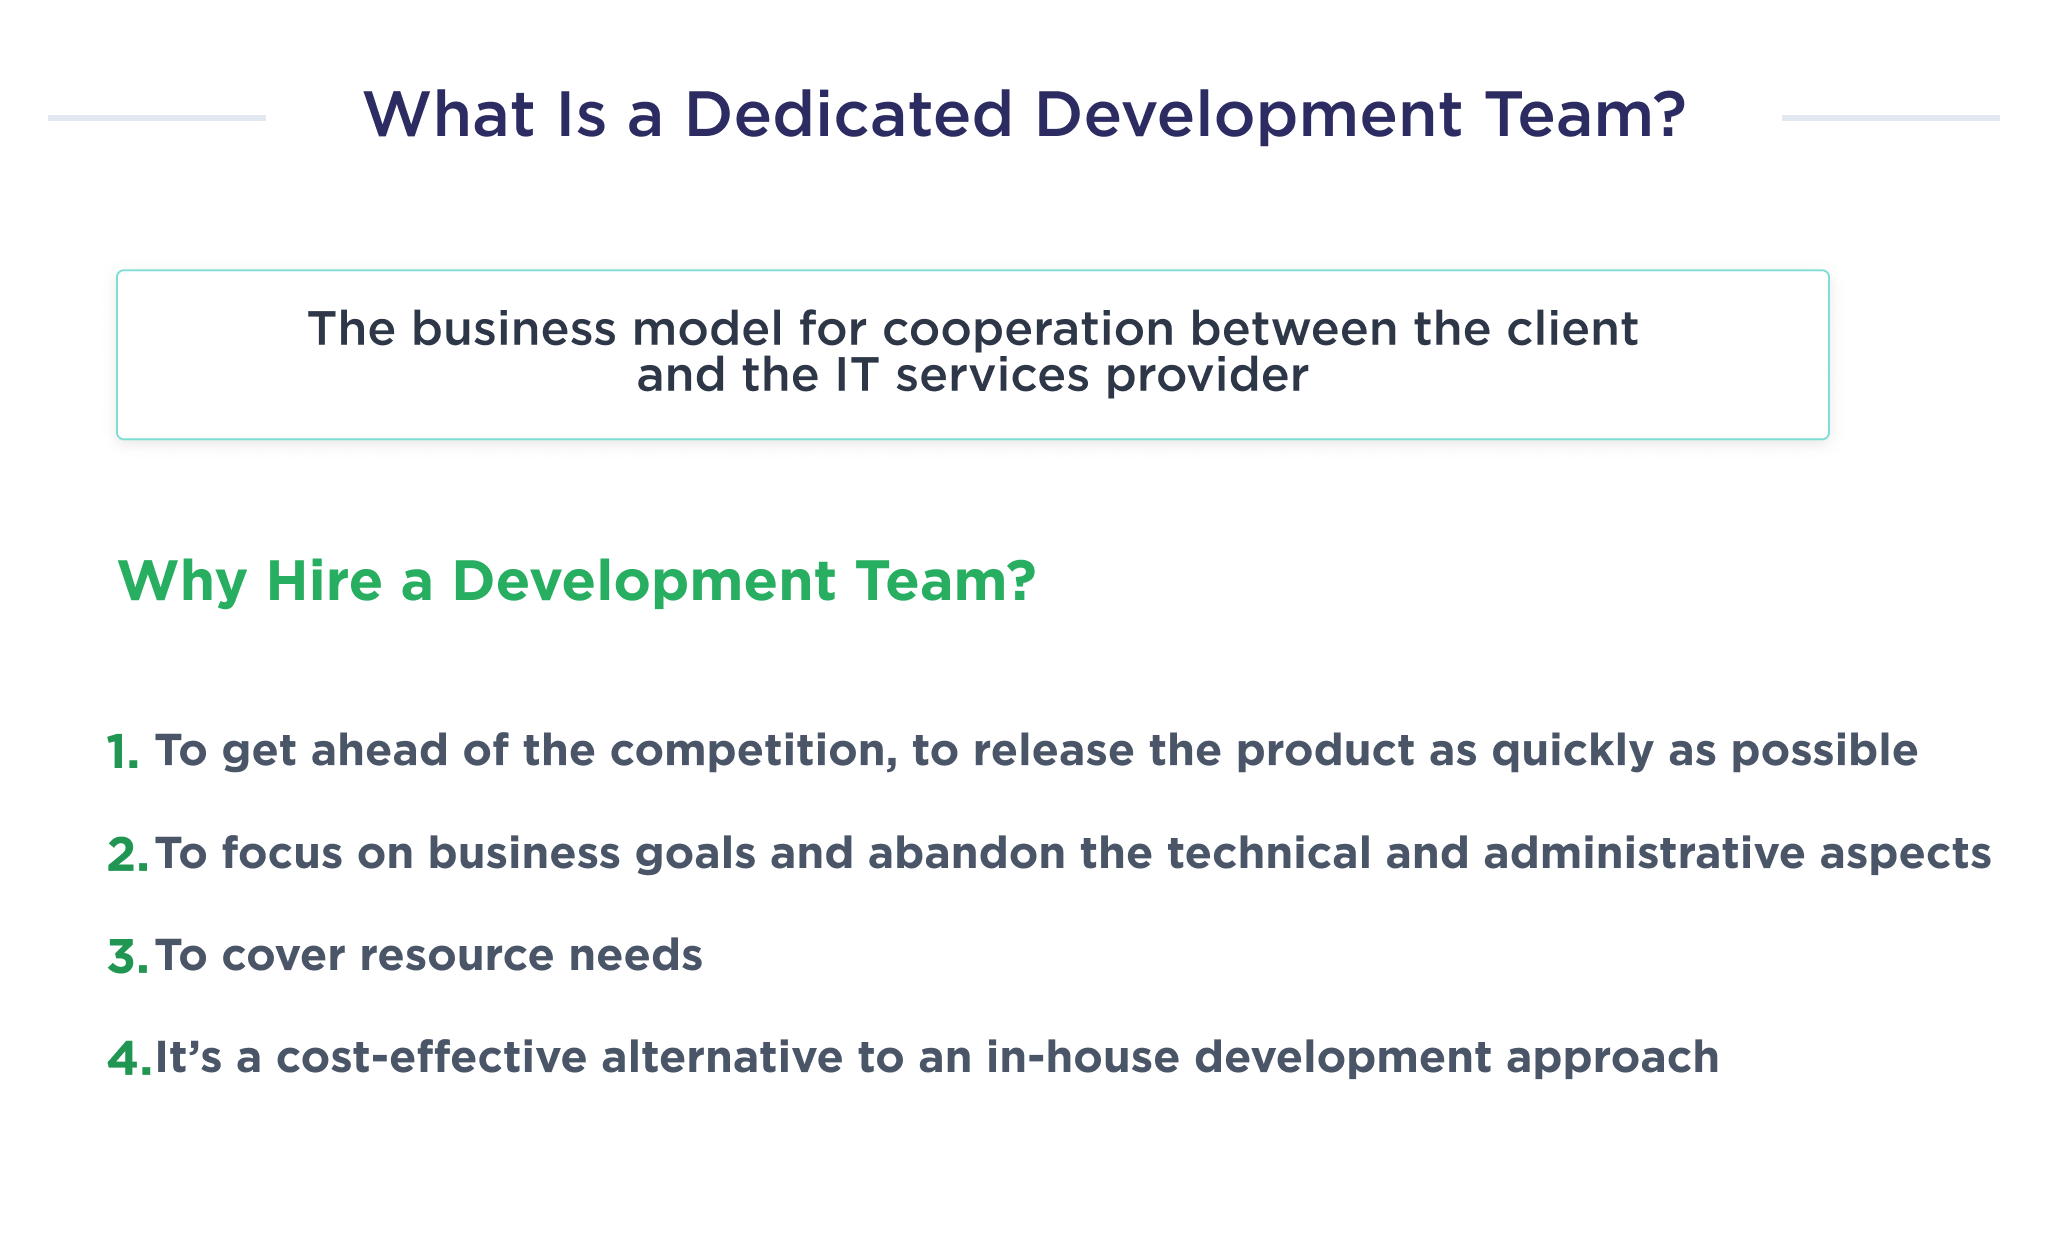 An explanation of what a dedicated development team is